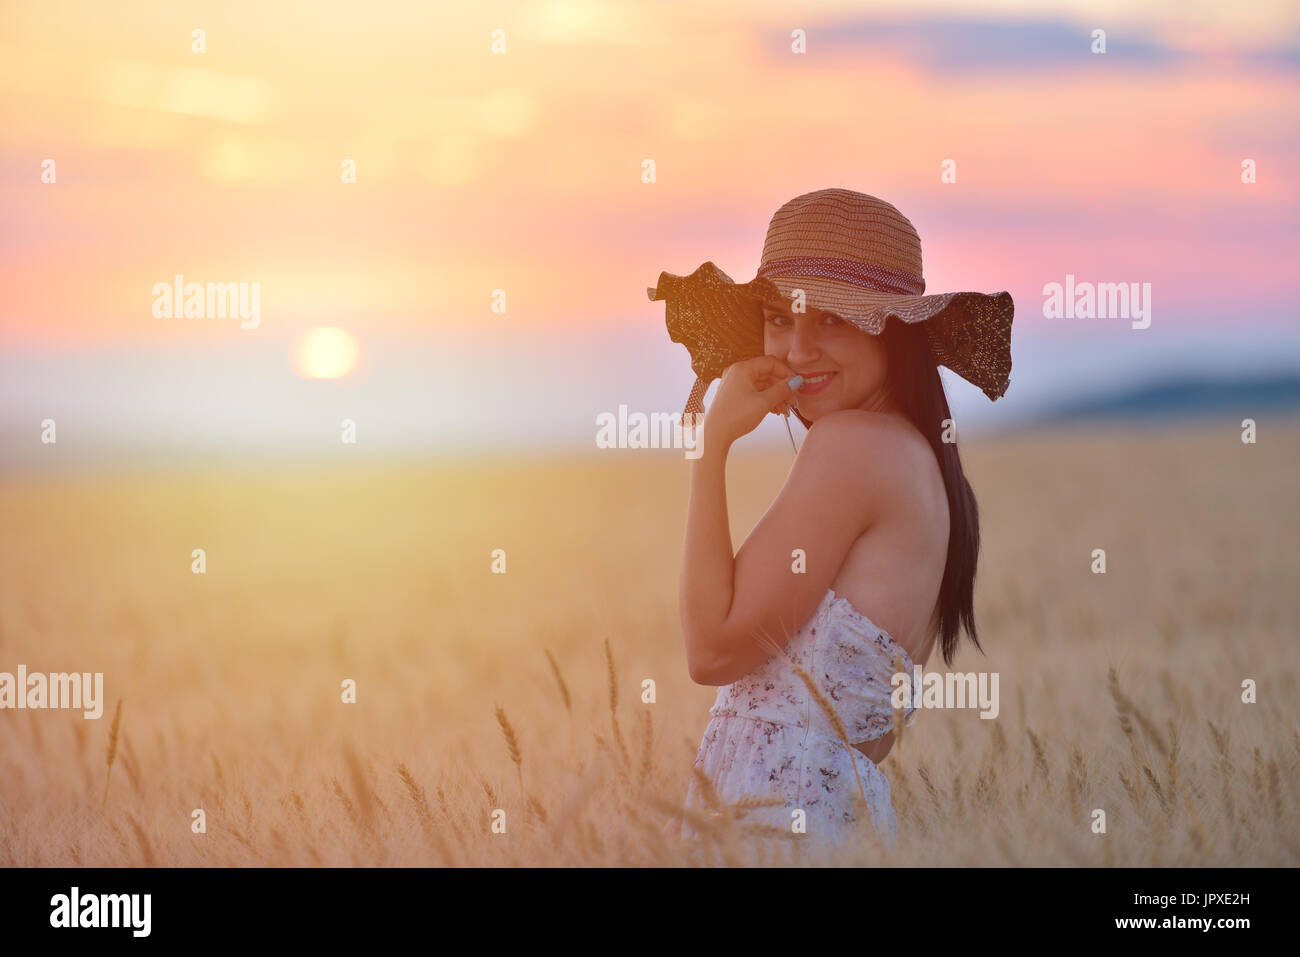 Closeup portrait of smiling young caucasian woman in nature. Cheerful young beautiful woman enjoying a day in natural enviroment at sunset. Stock Photo